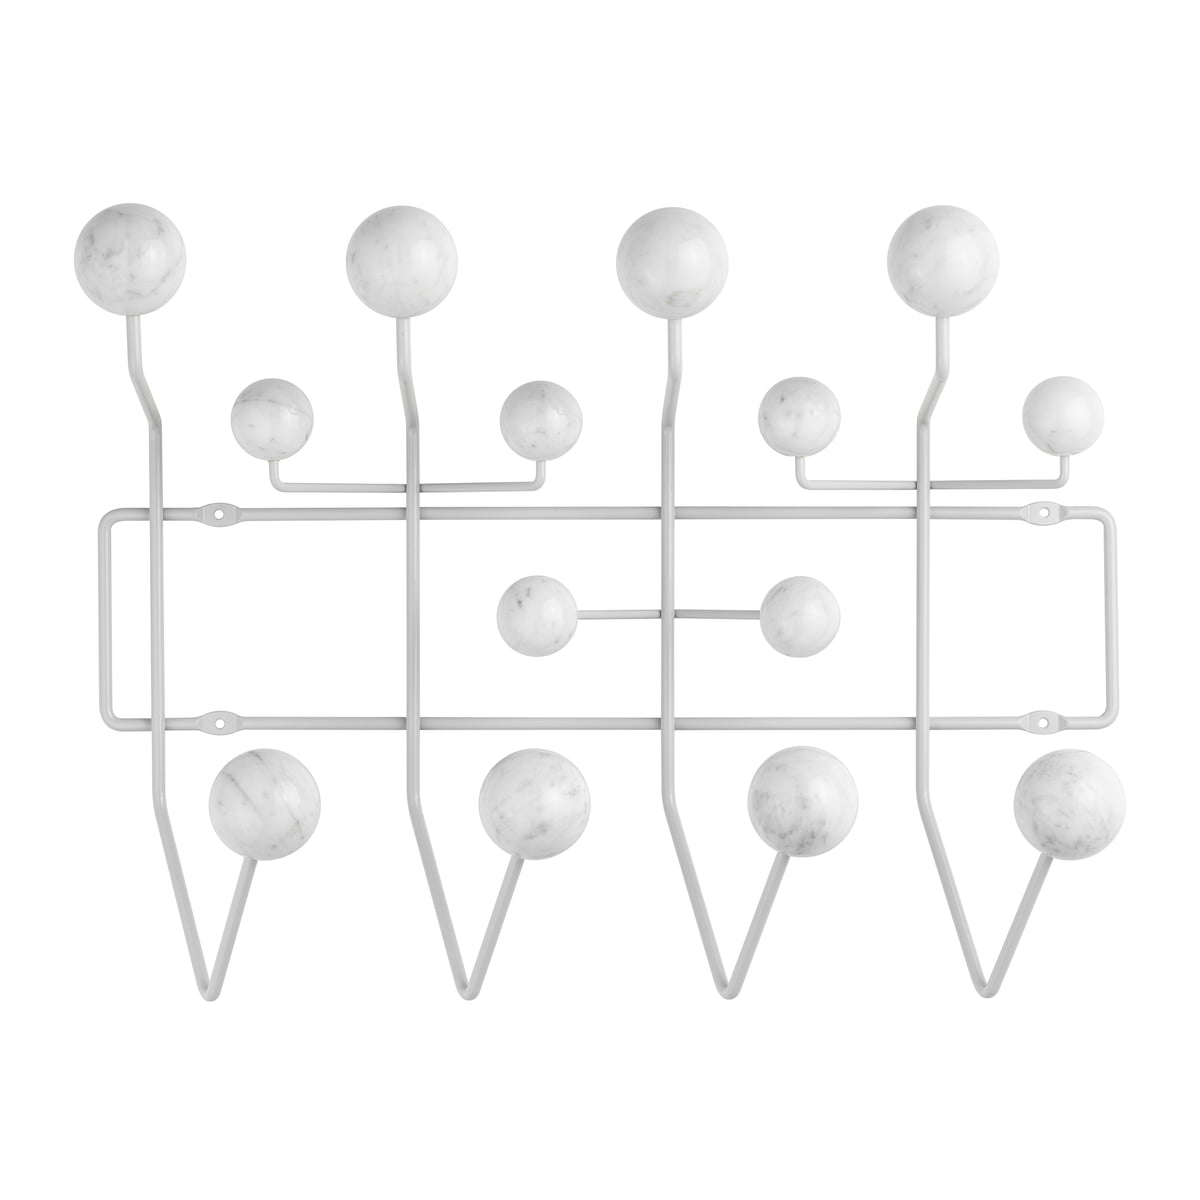 Hang it coat rack by Vitra in our shop